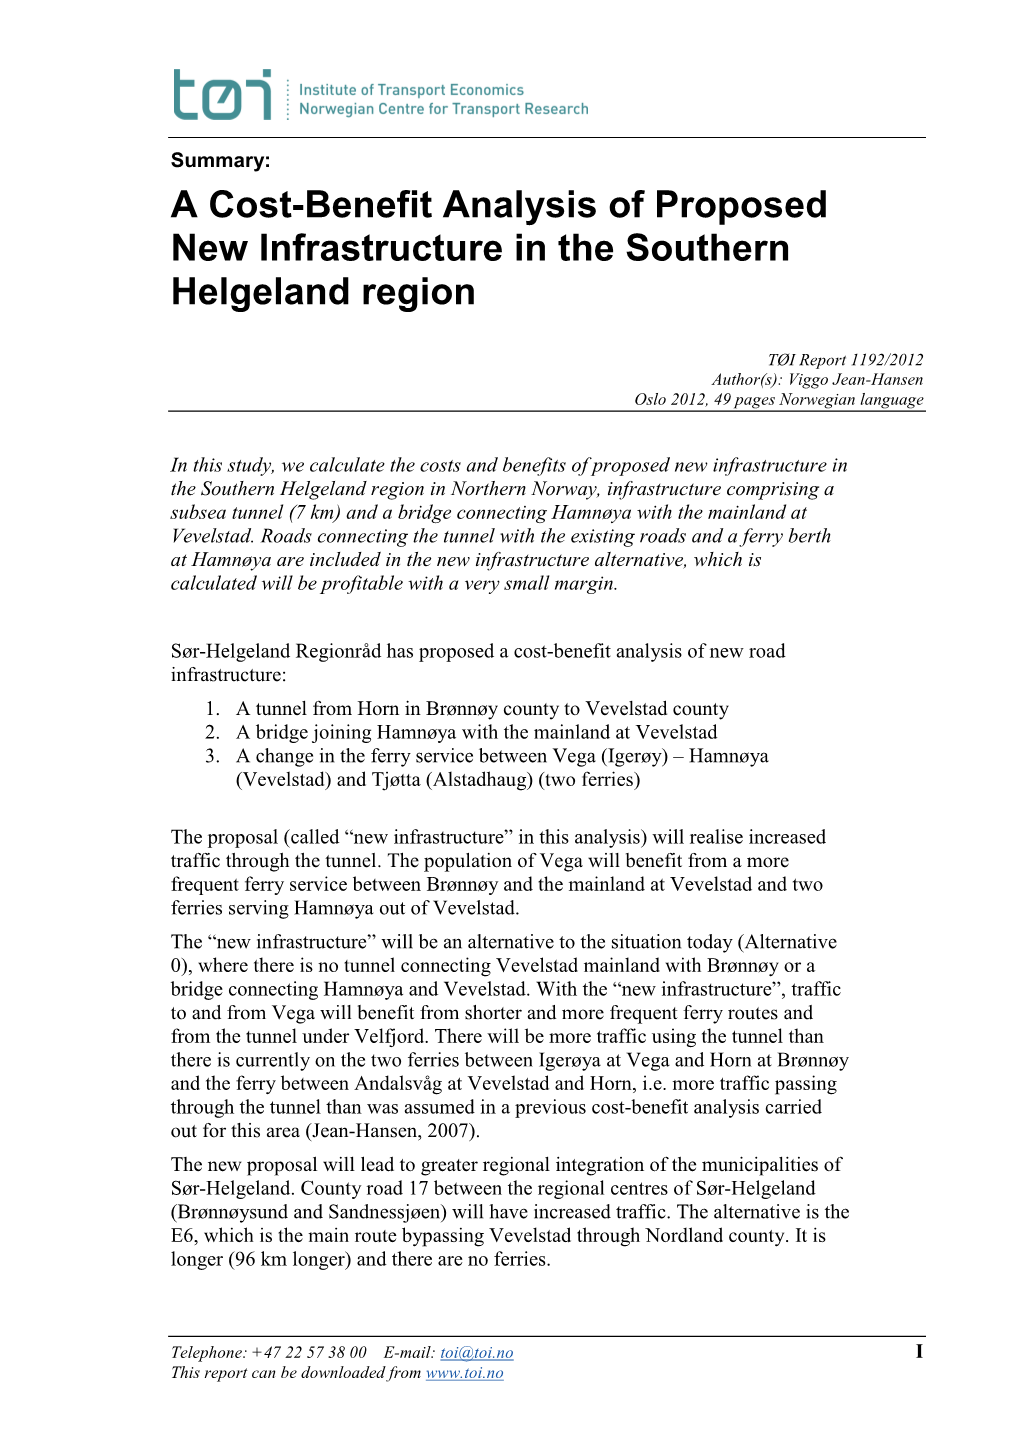 A Cost-Benefit Analysis of Proposed New Infrastructure in the Southern Helgeland Region